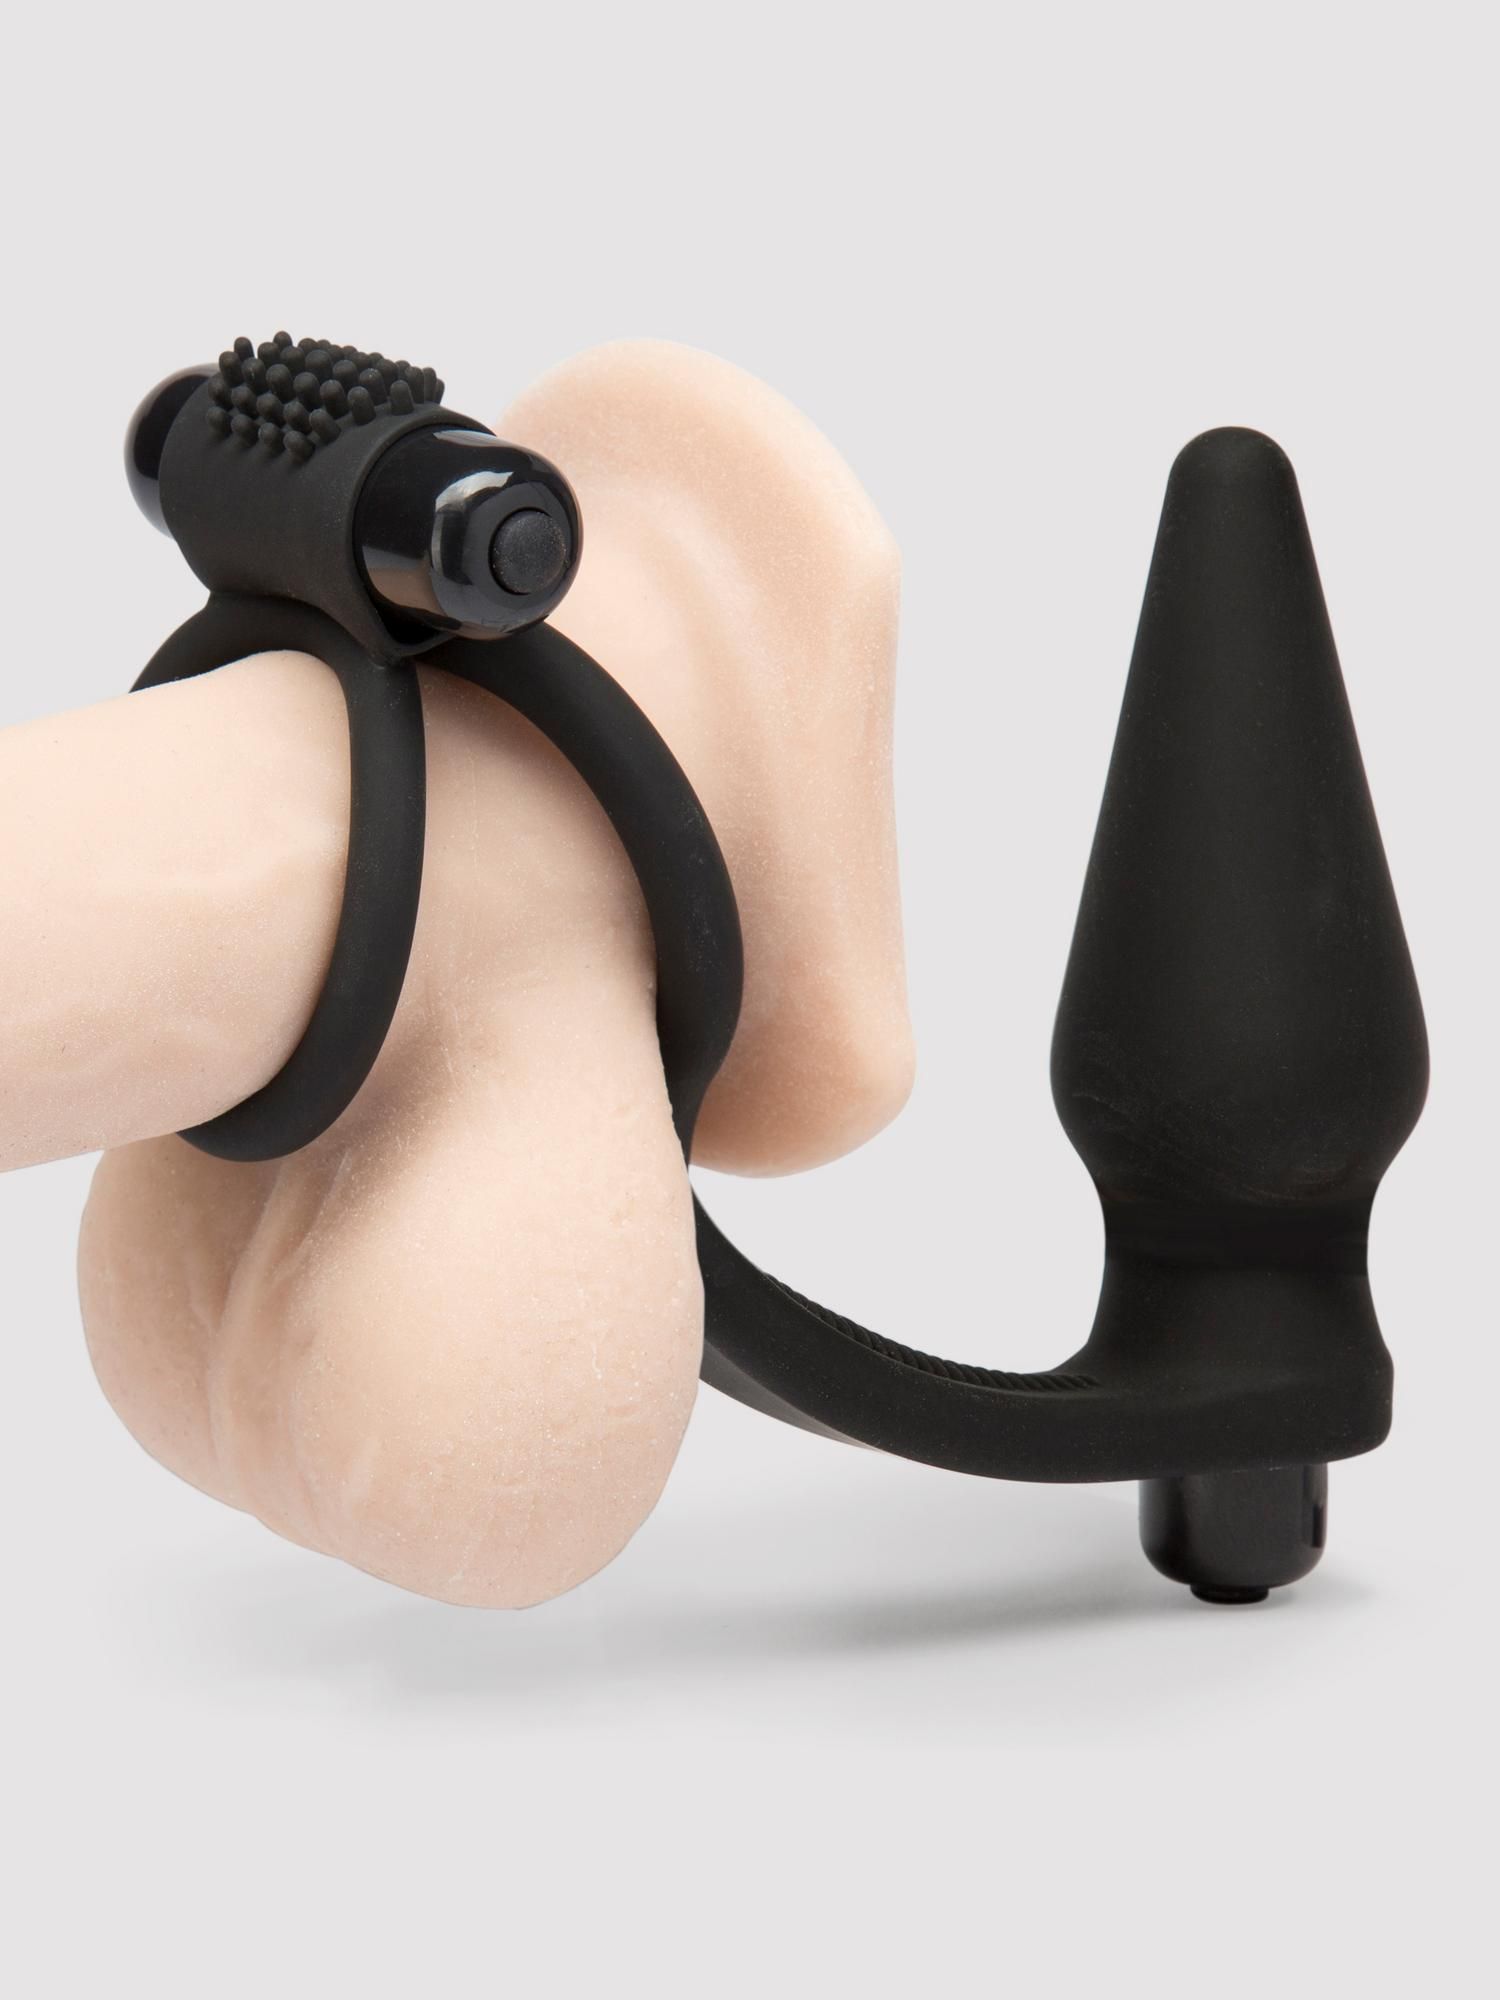 Wowzer 7 Function Double Cock Ring and Vibrating Butt Plug